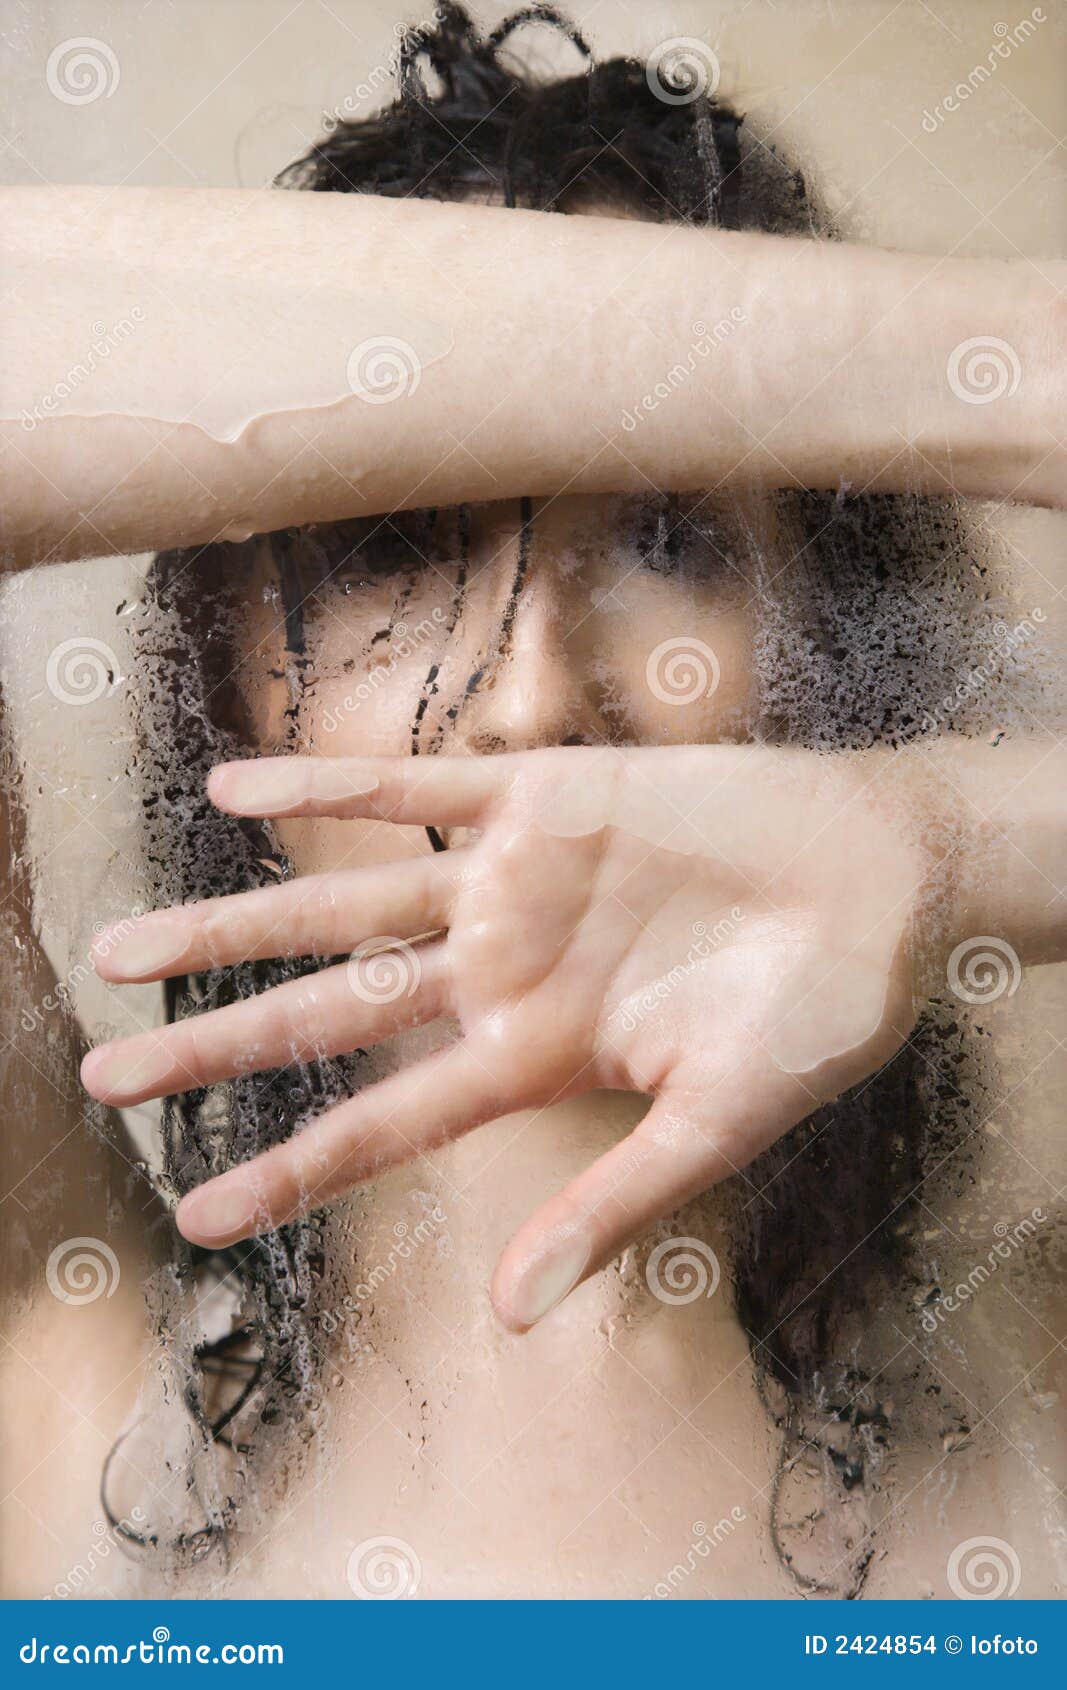 Woman In Shower Stock Photo Image Of Image Hea